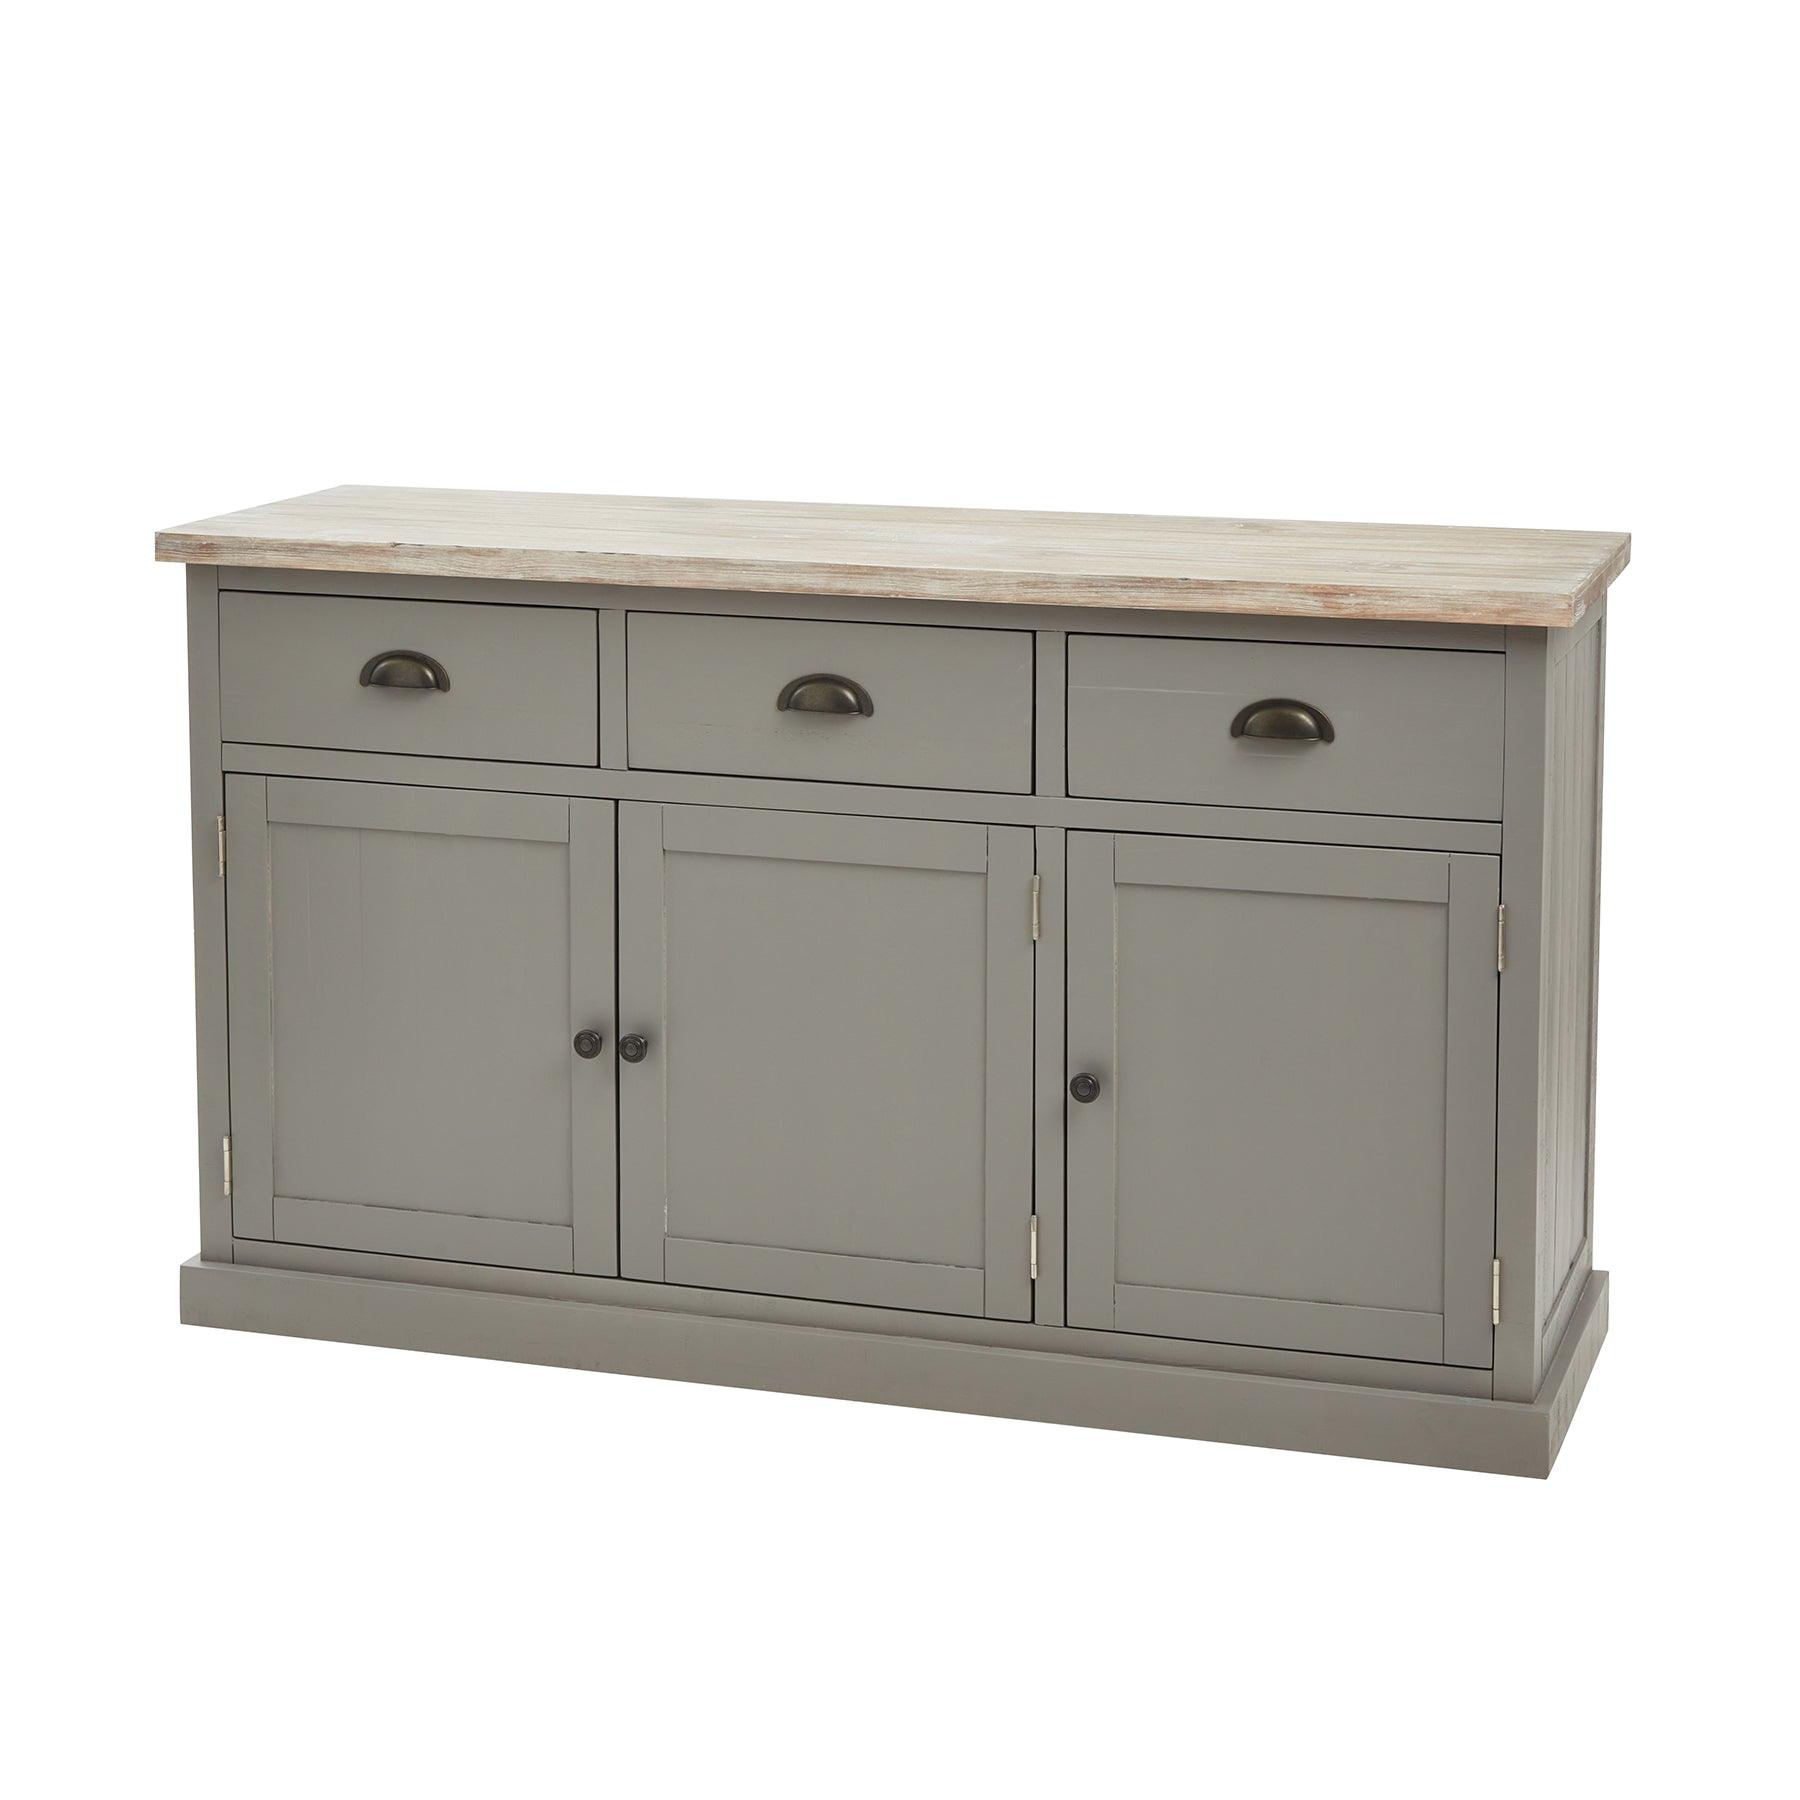 View The Oxley Collection Sideboard information